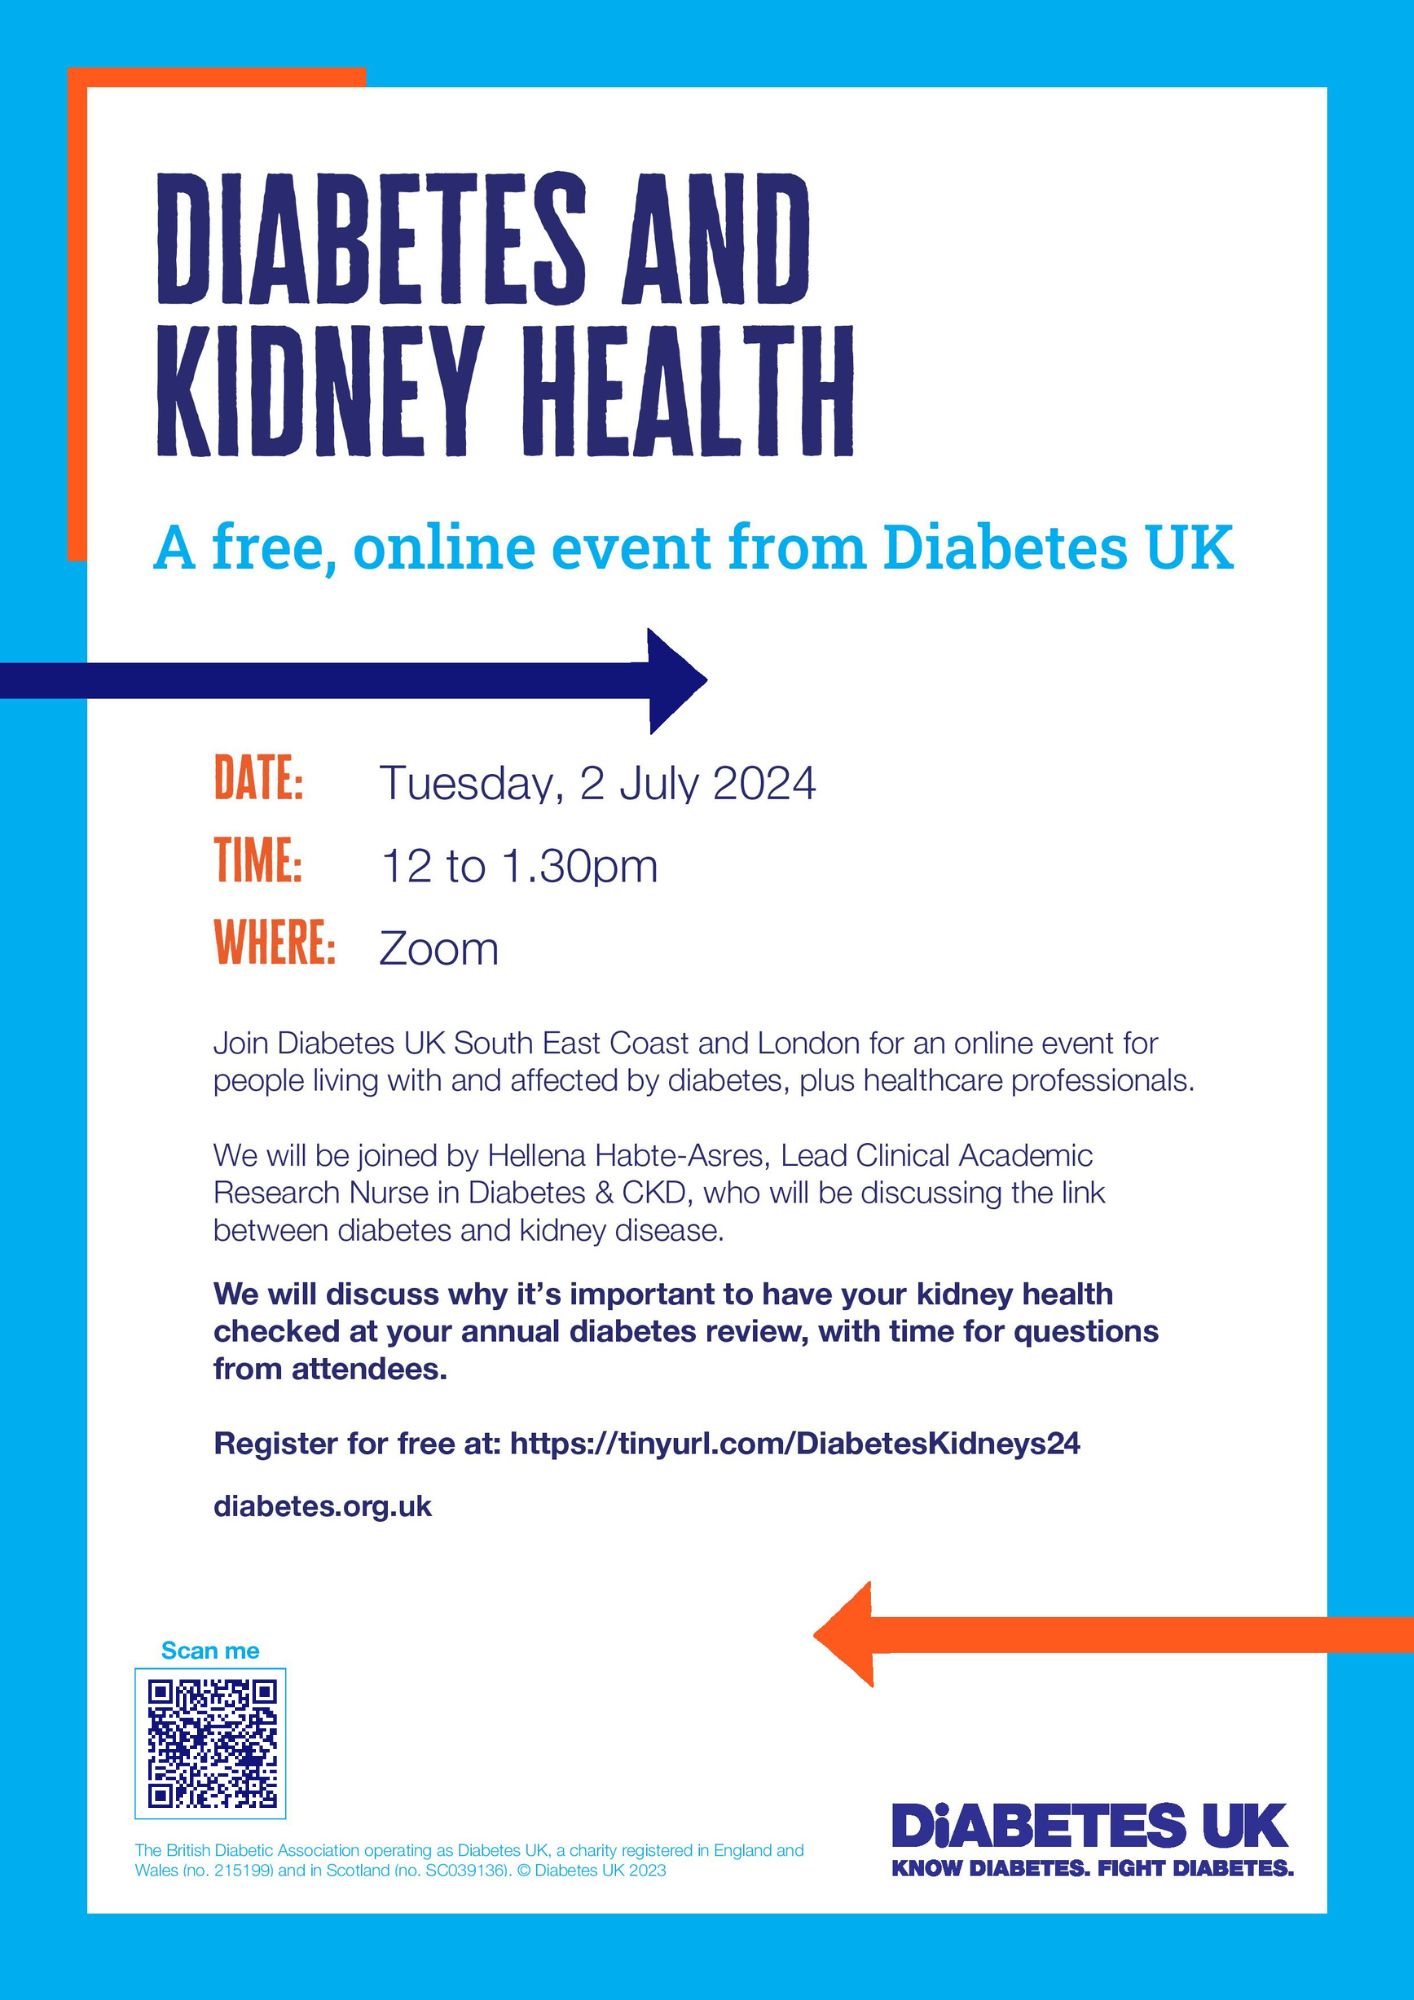 Diabetes and kidney health online event